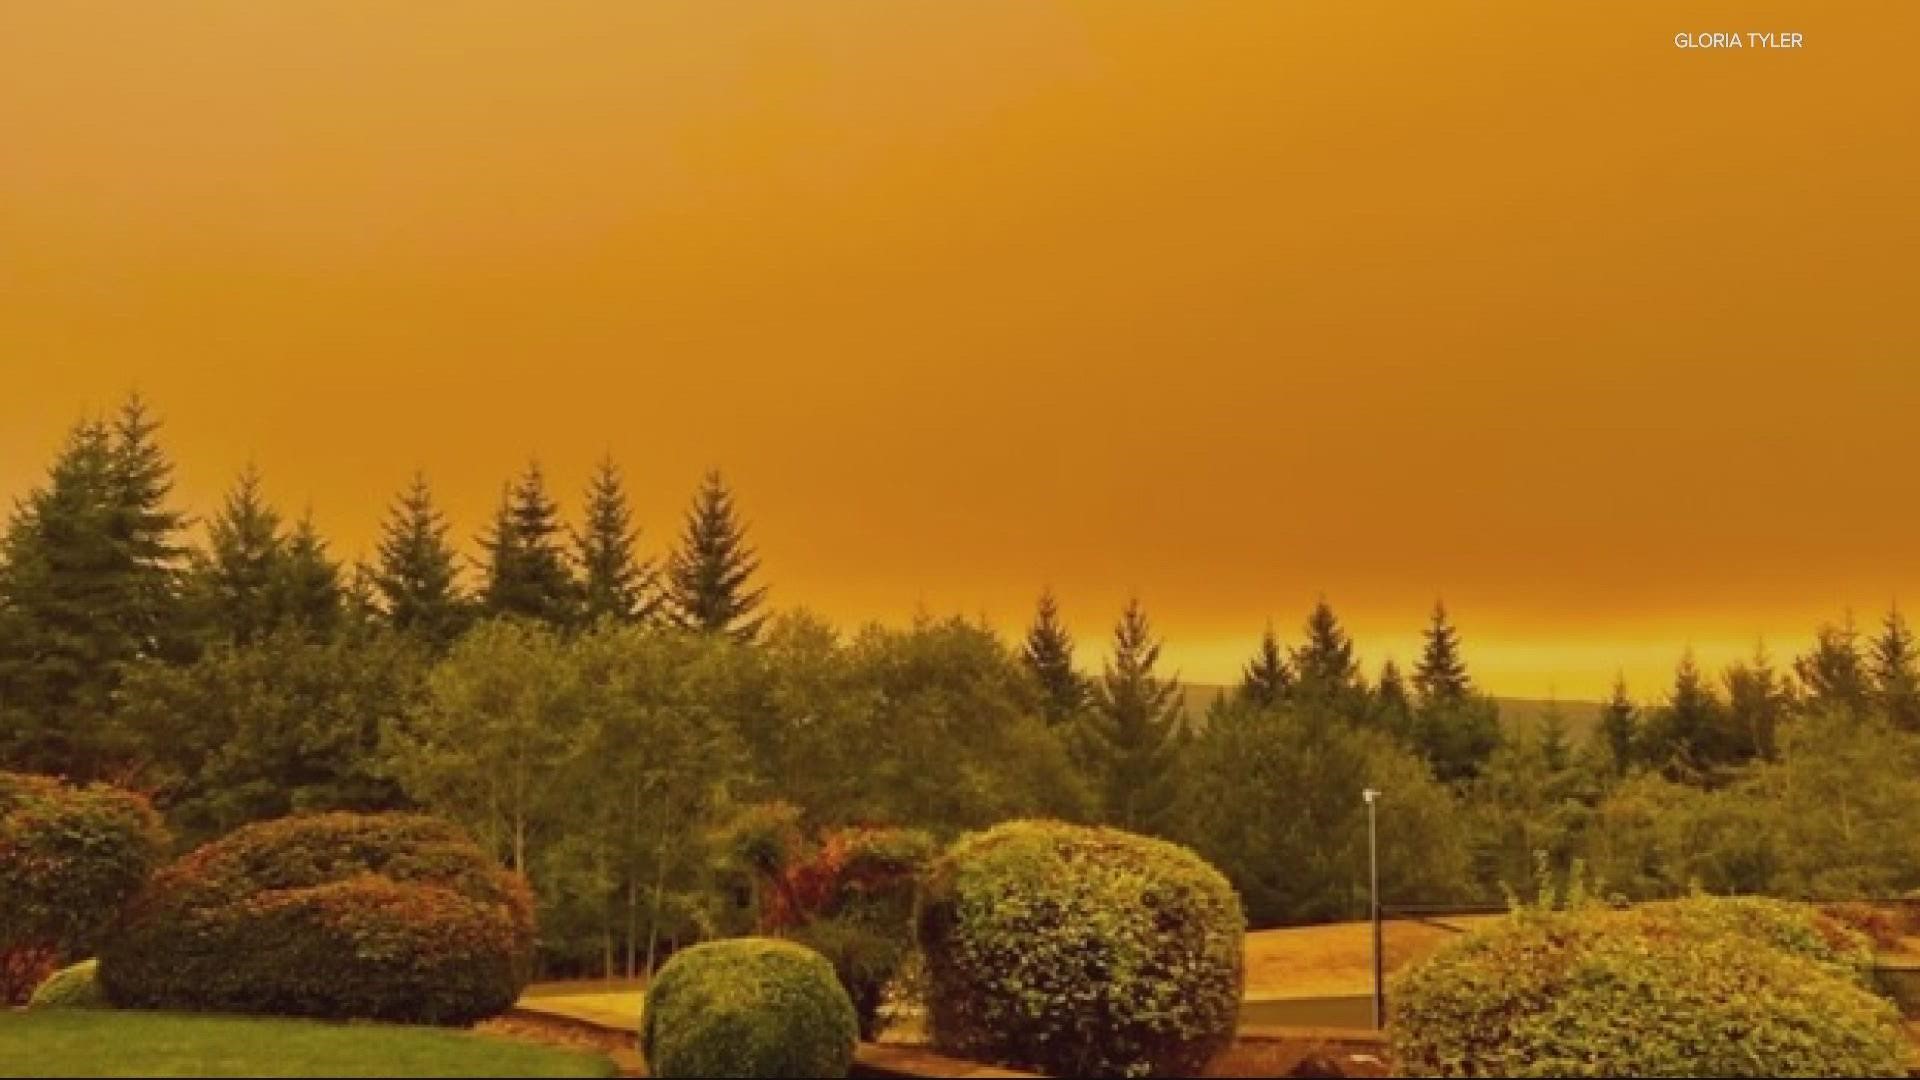 The Oregon Department of Environmental Quality said Portland air is rated ”moderate,” but air in Oakridge, near the big wildfire, is rated “hazardous.” Here’s how yo